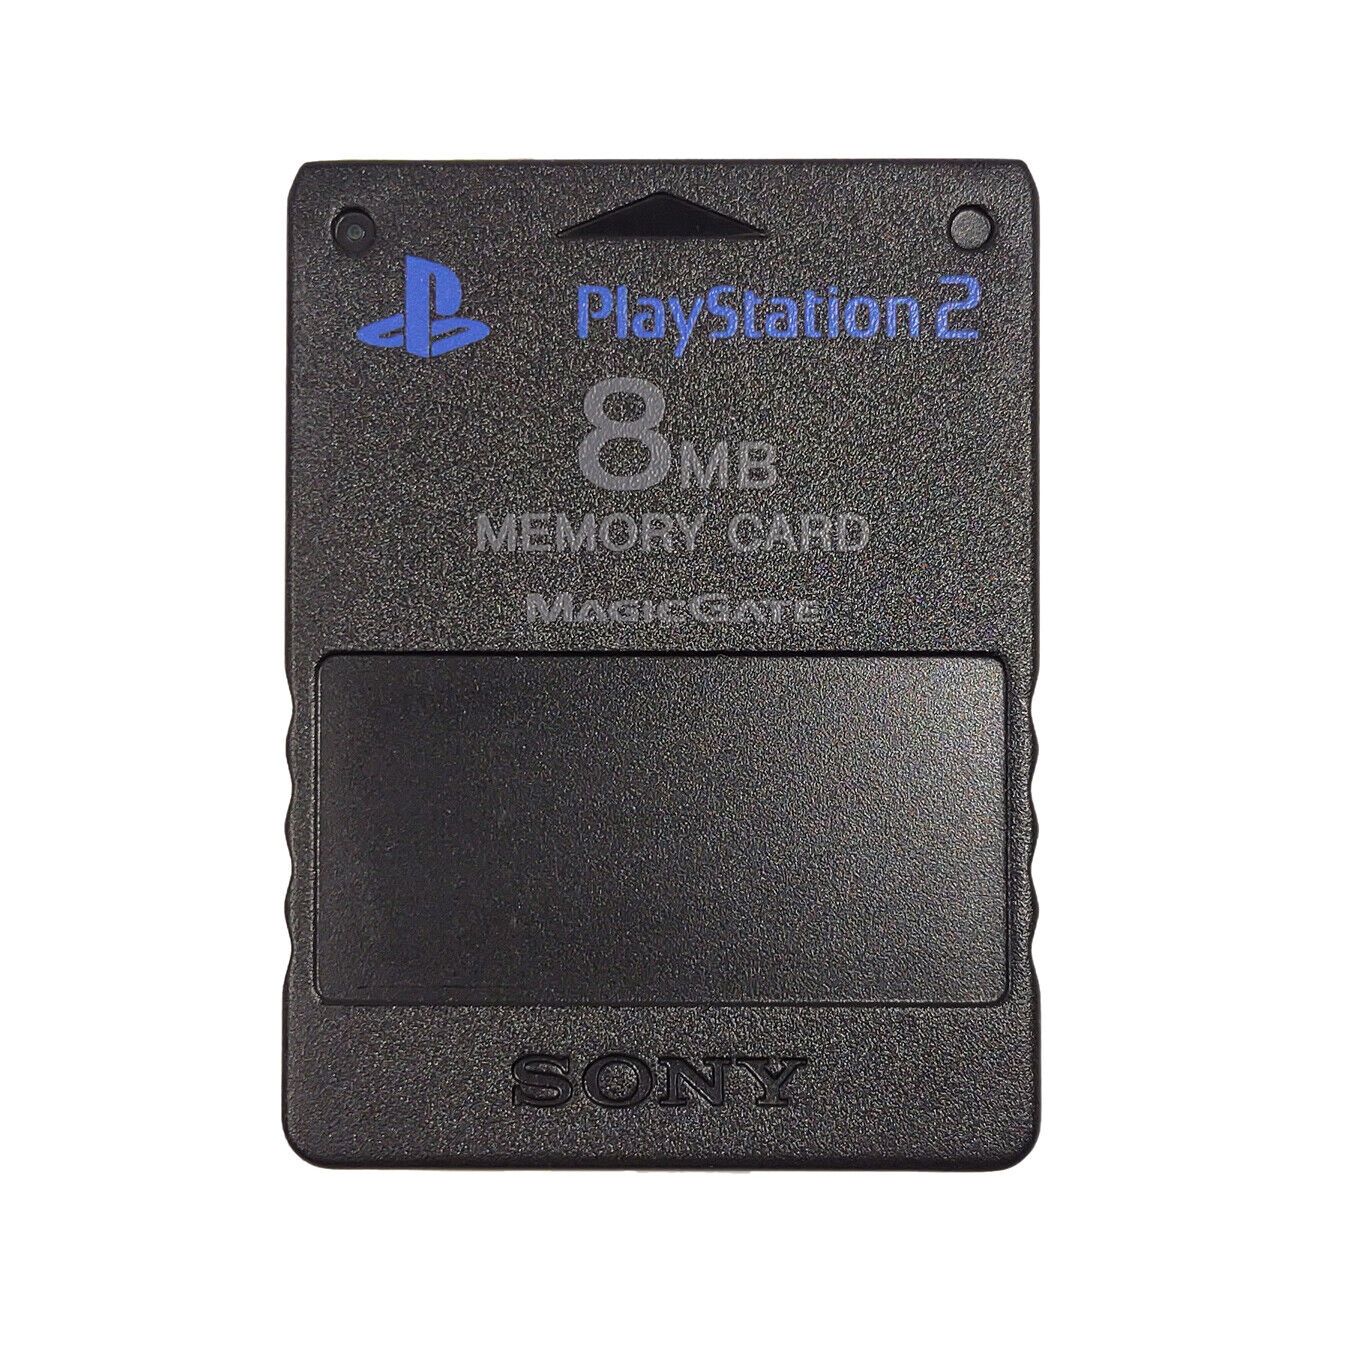 Sony PlayStation 2 Memory Card PS2 Genuine Official MagicGate 8MB SCPH-10020